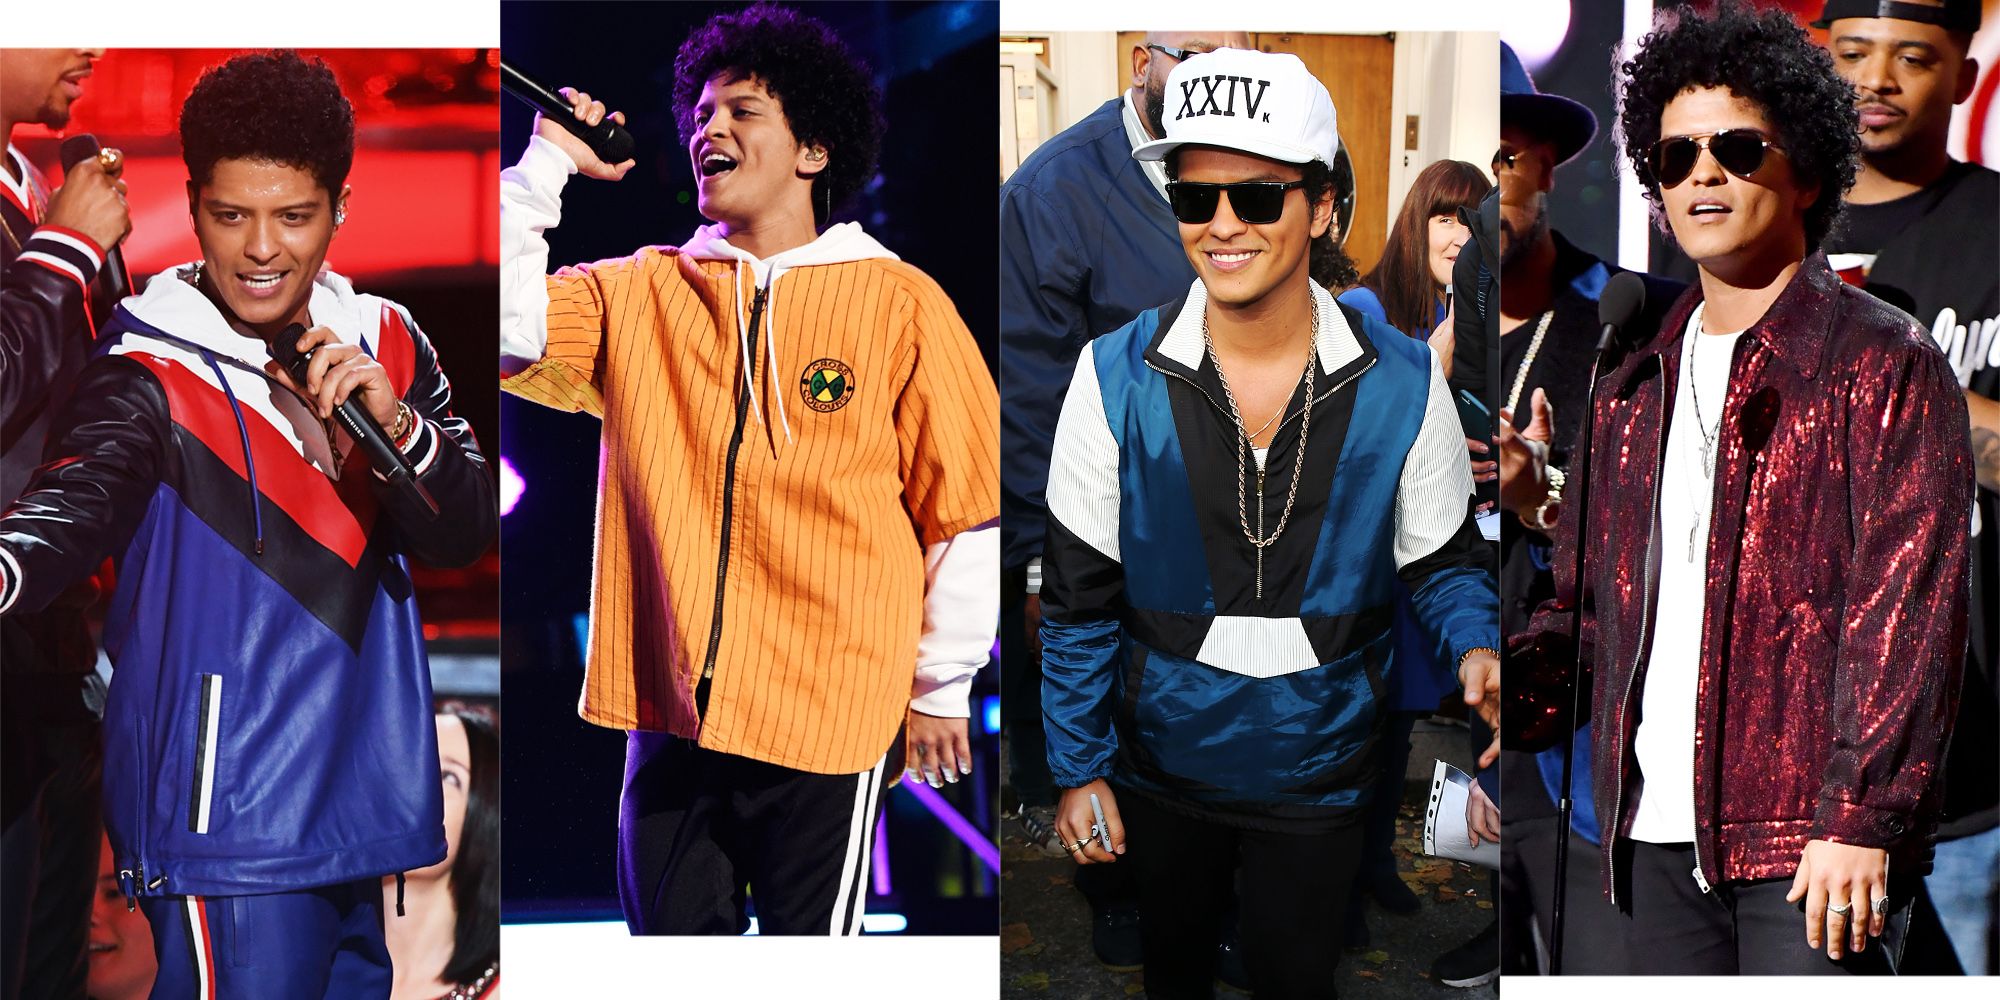 Bruno Mars' Style Is Completely Over the Top and That's the Whole Point